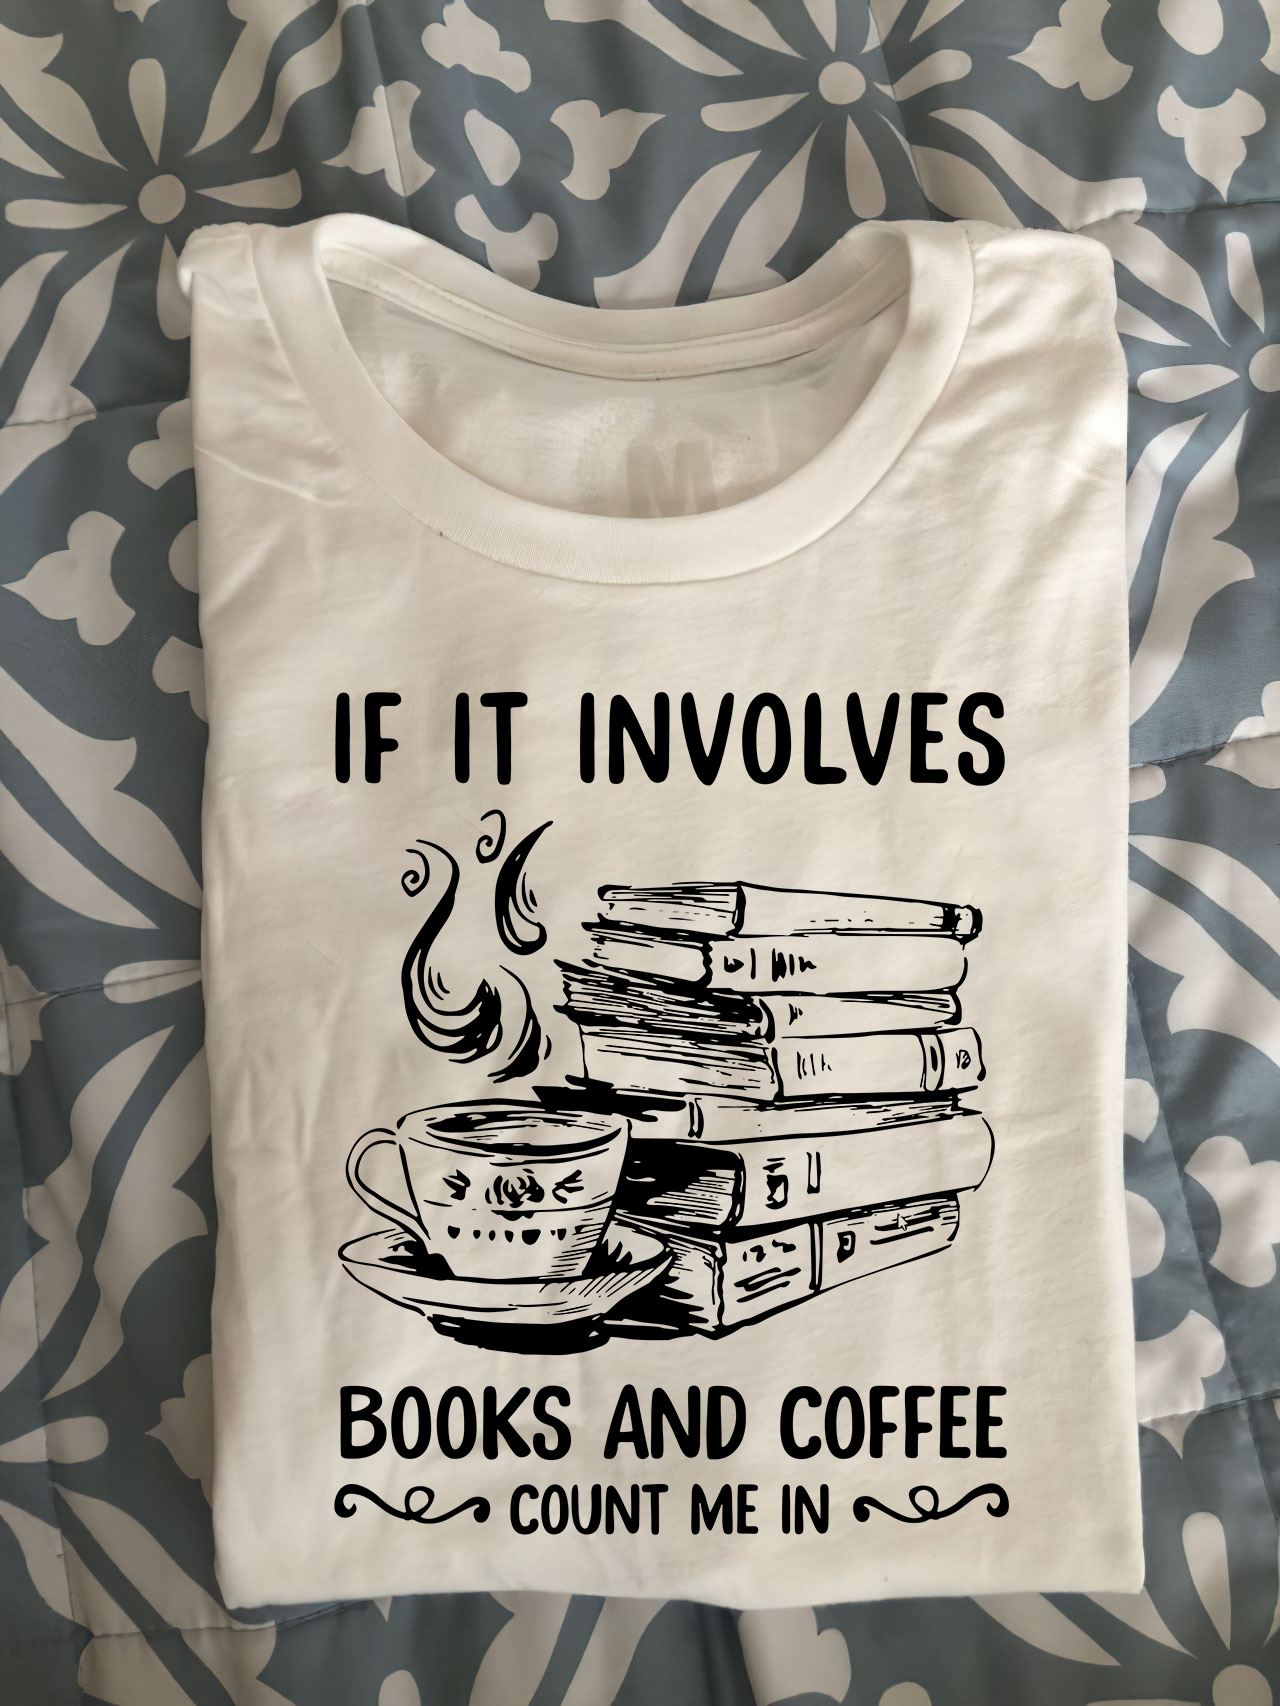 If it involves books and coffee count me in - Books lover